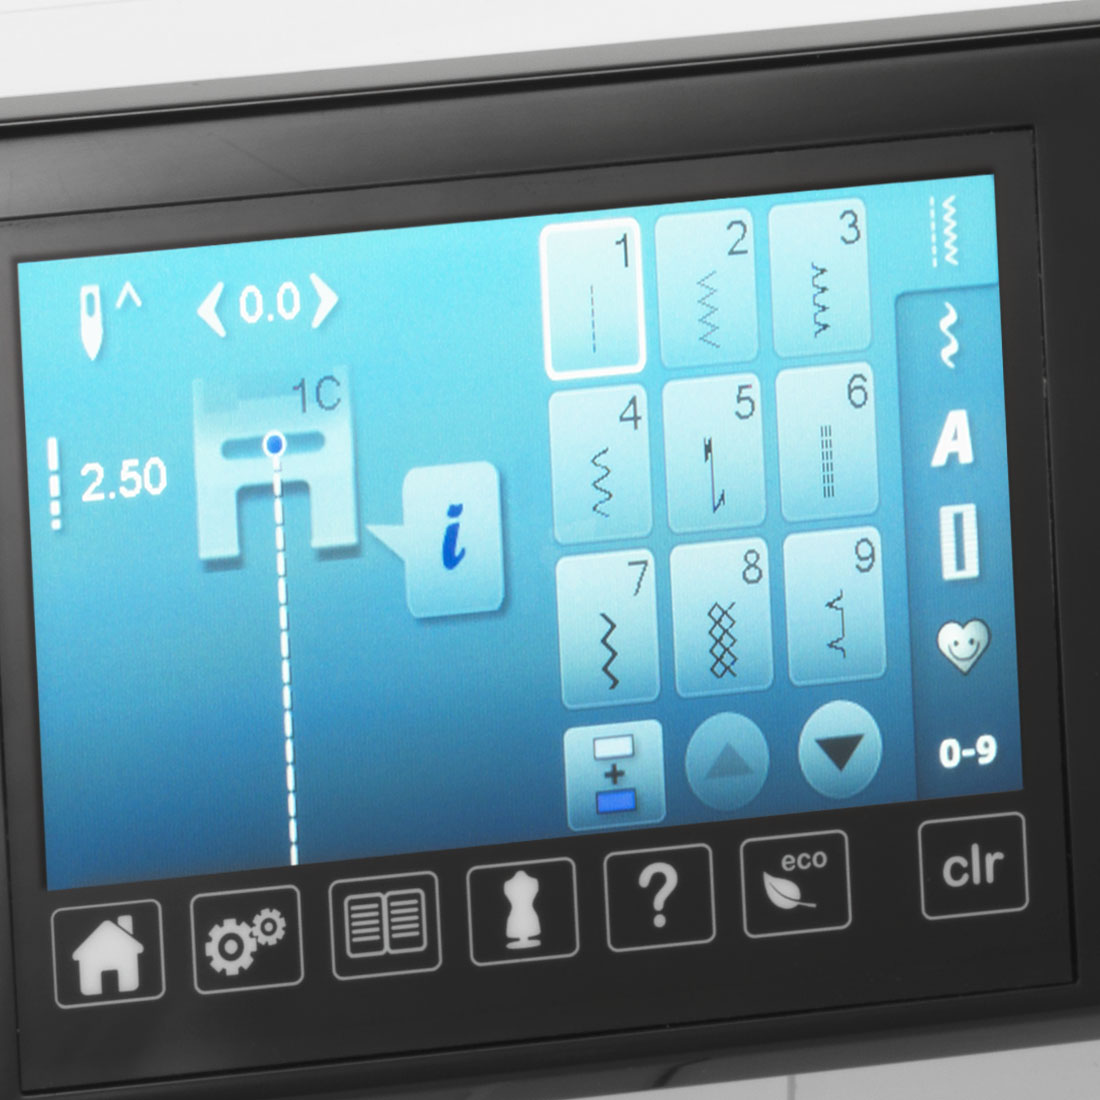 Intuitive operation via the high-resolution touchscreen